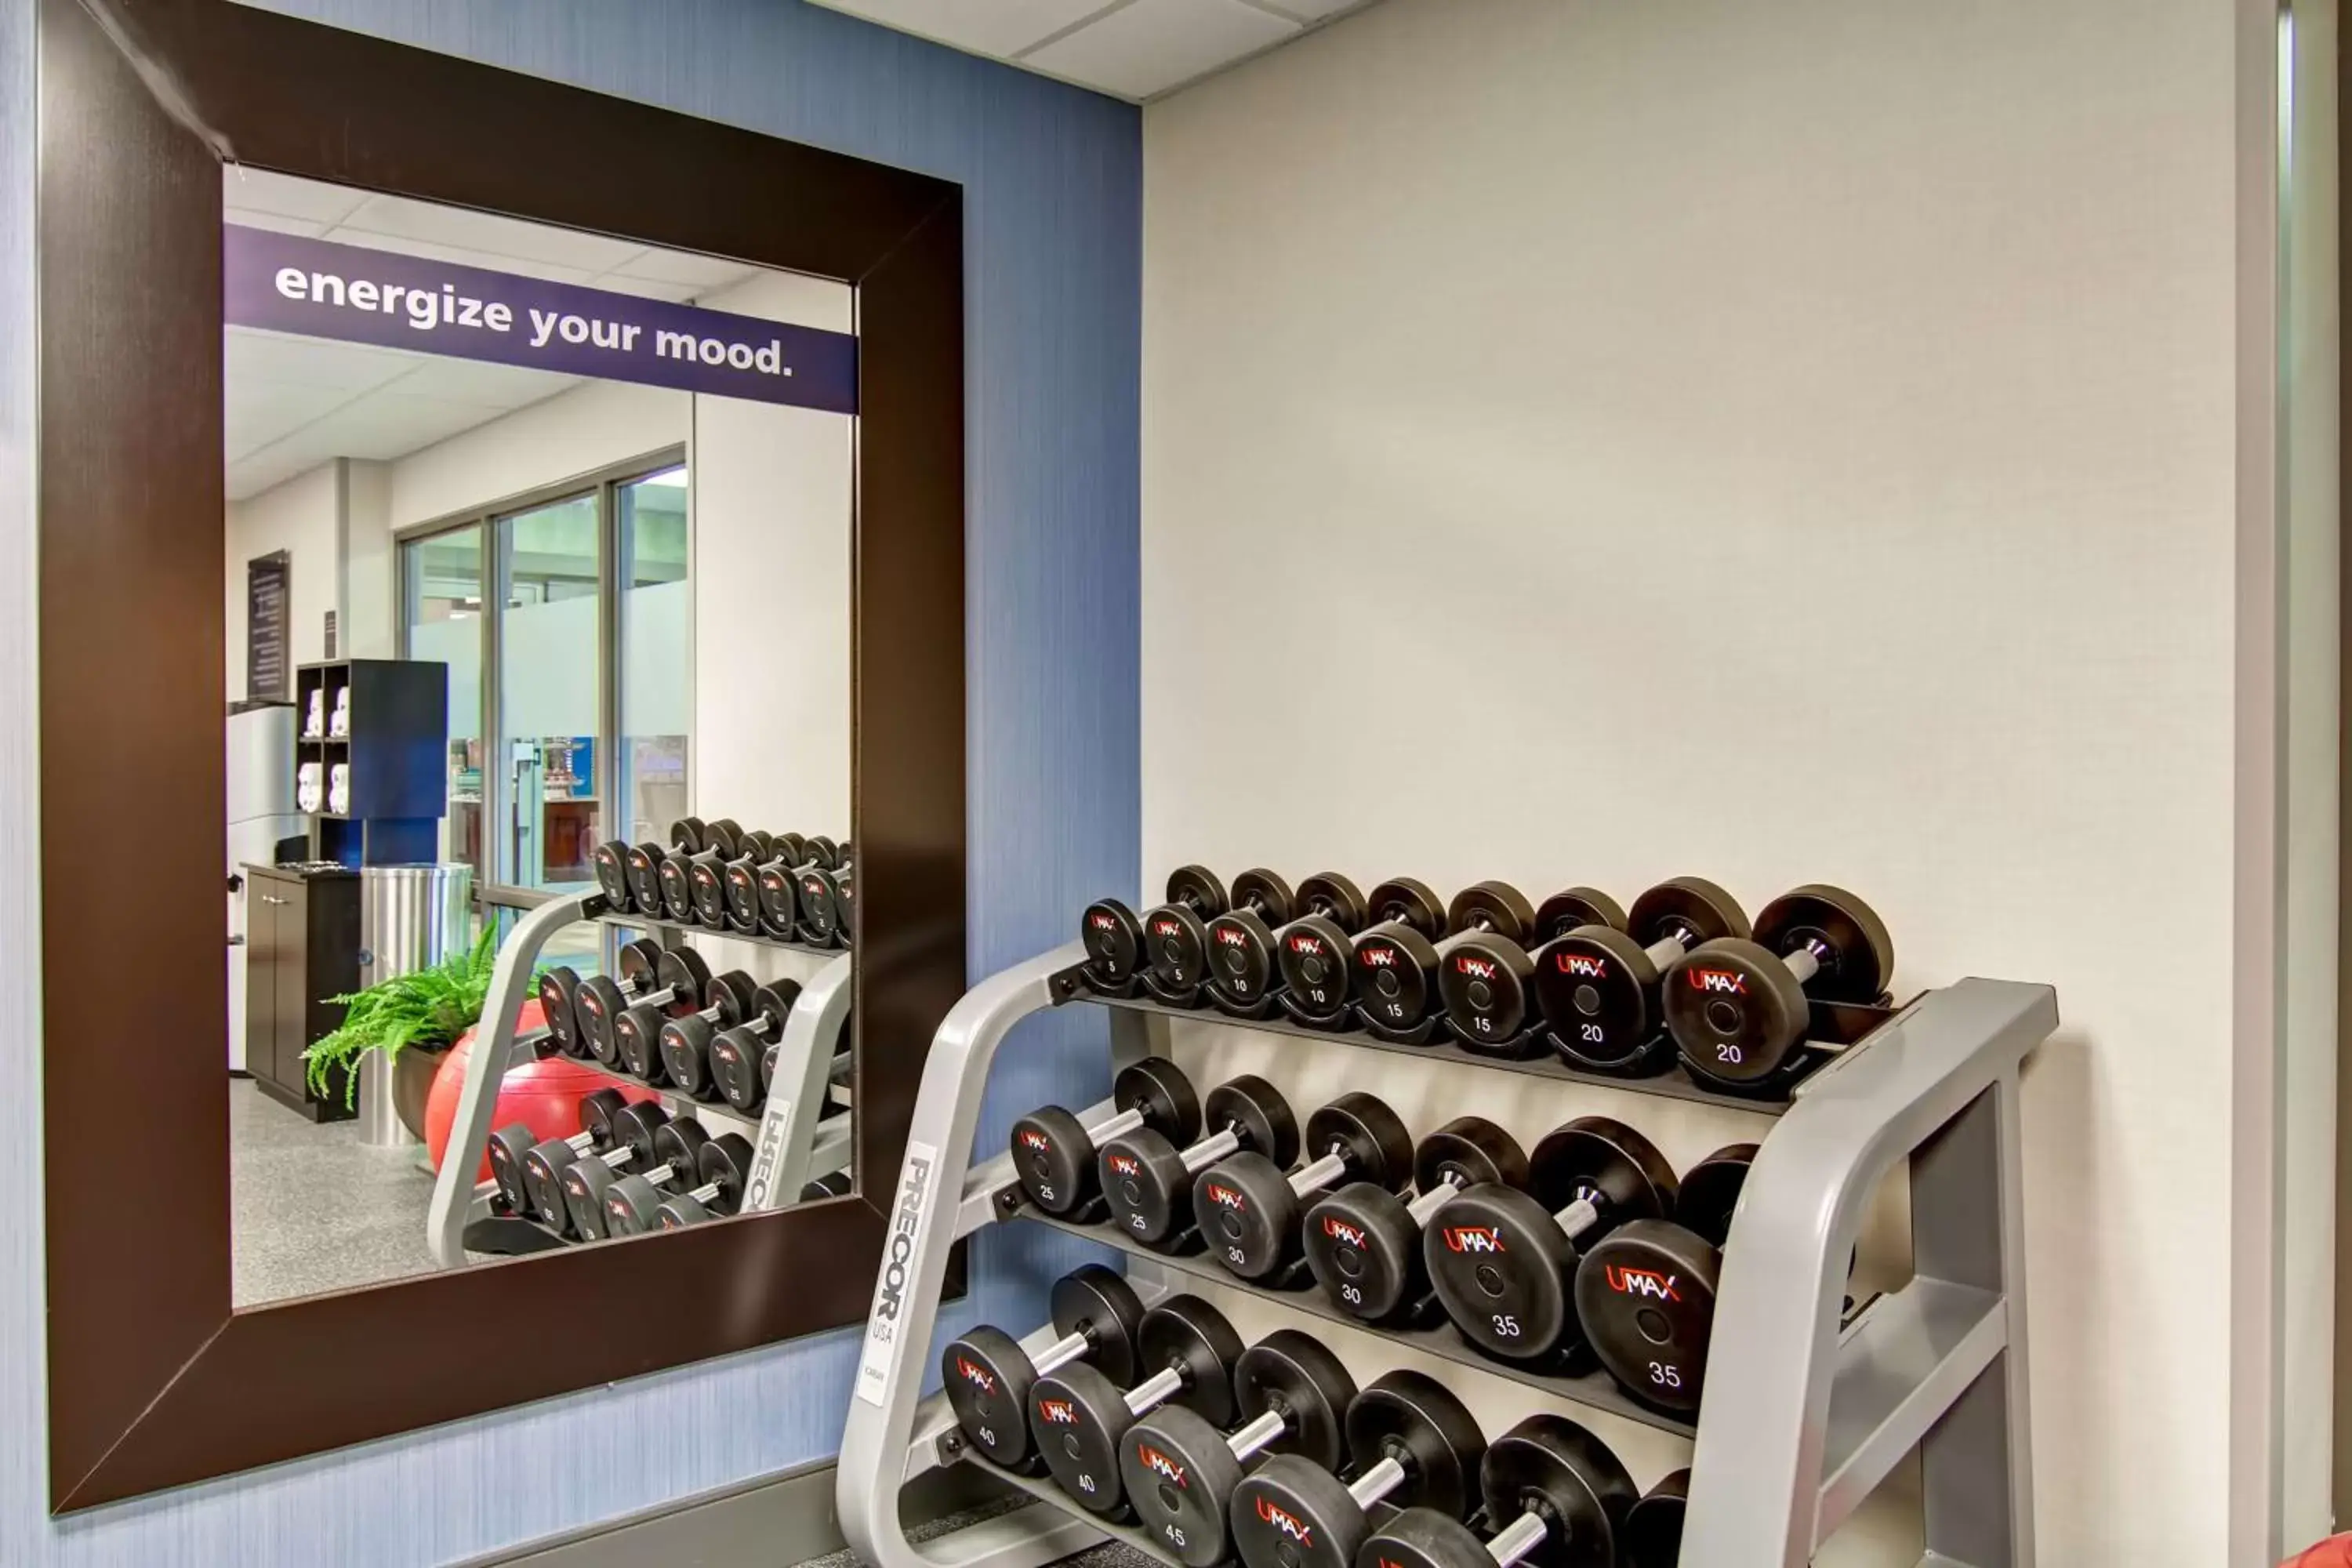 Fitness centre/facilities, Fitness Center/Facilities in Hampton Inn By Hilton & Suites Guelph, Ontario, Canada